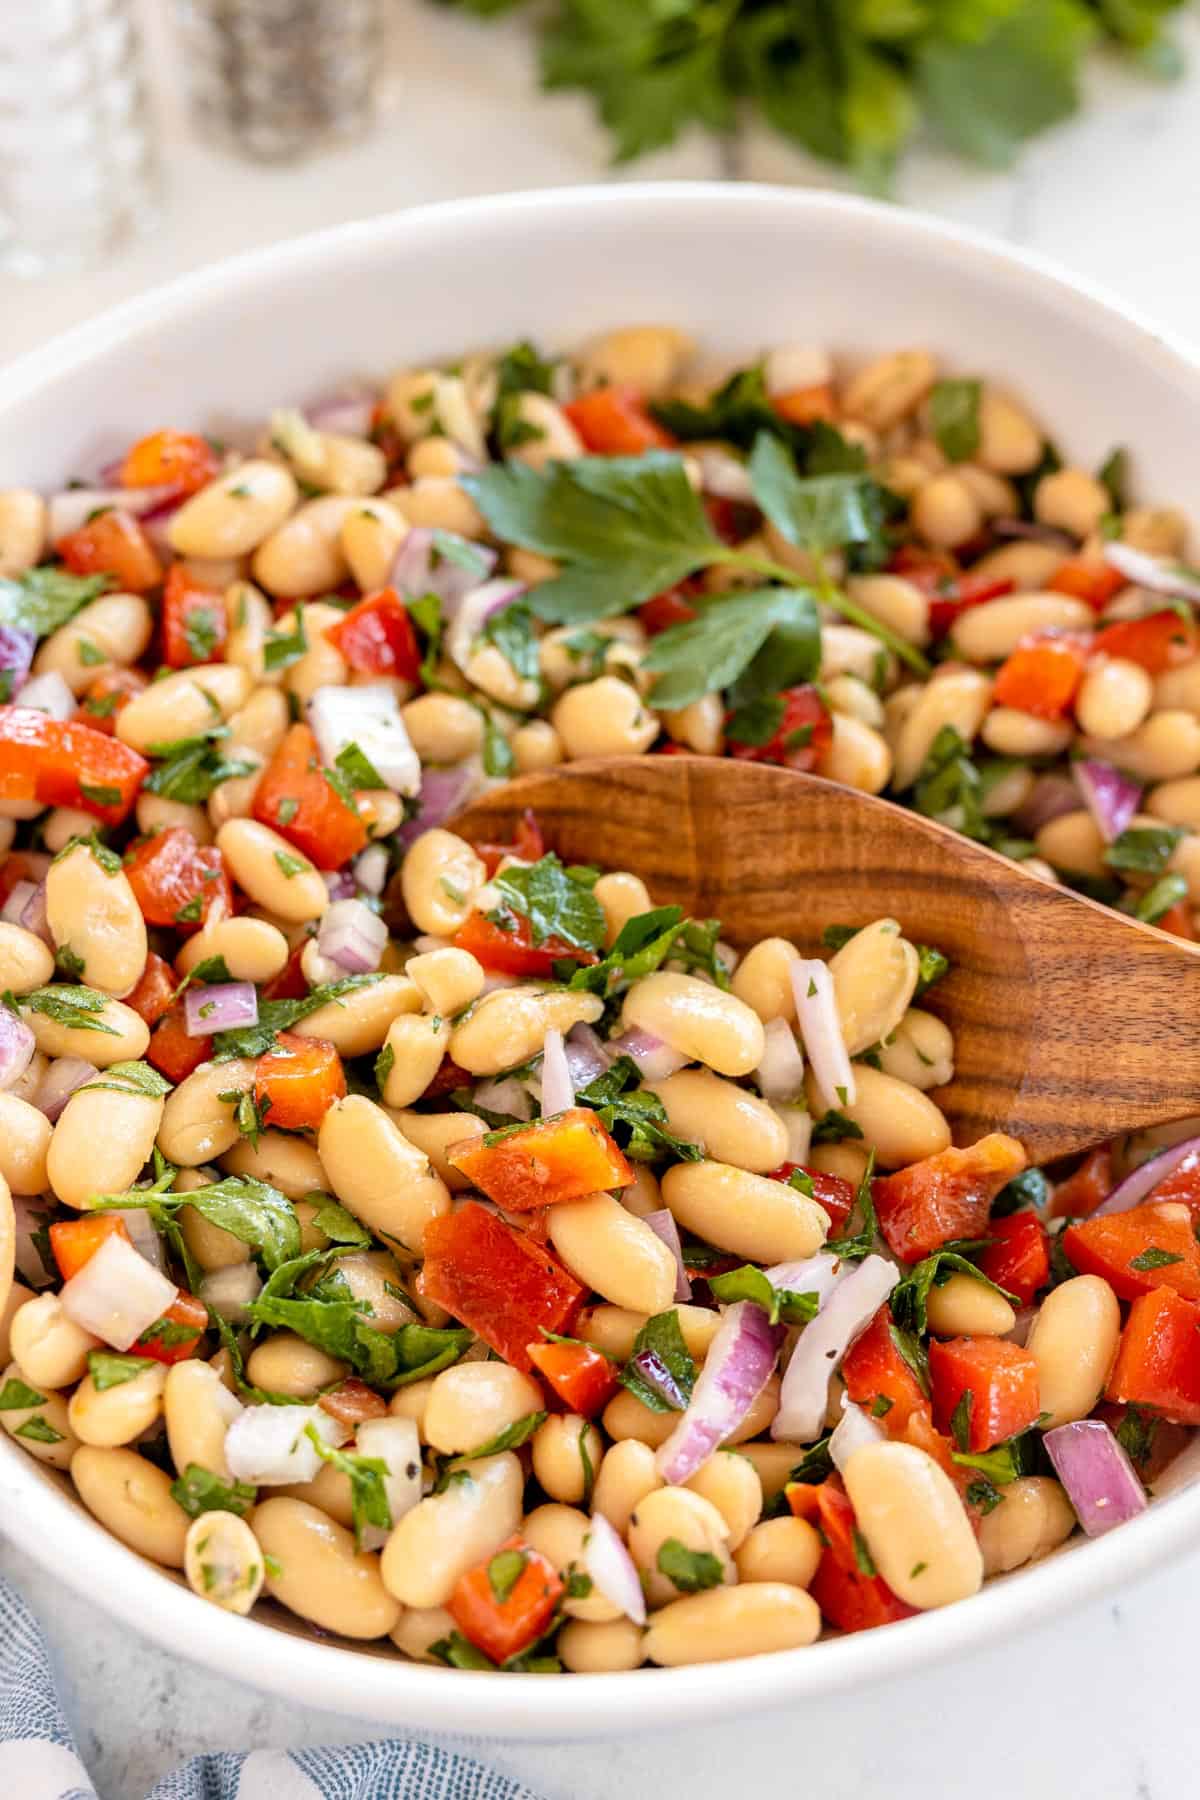 white bean salad in a white bowl with utensils.